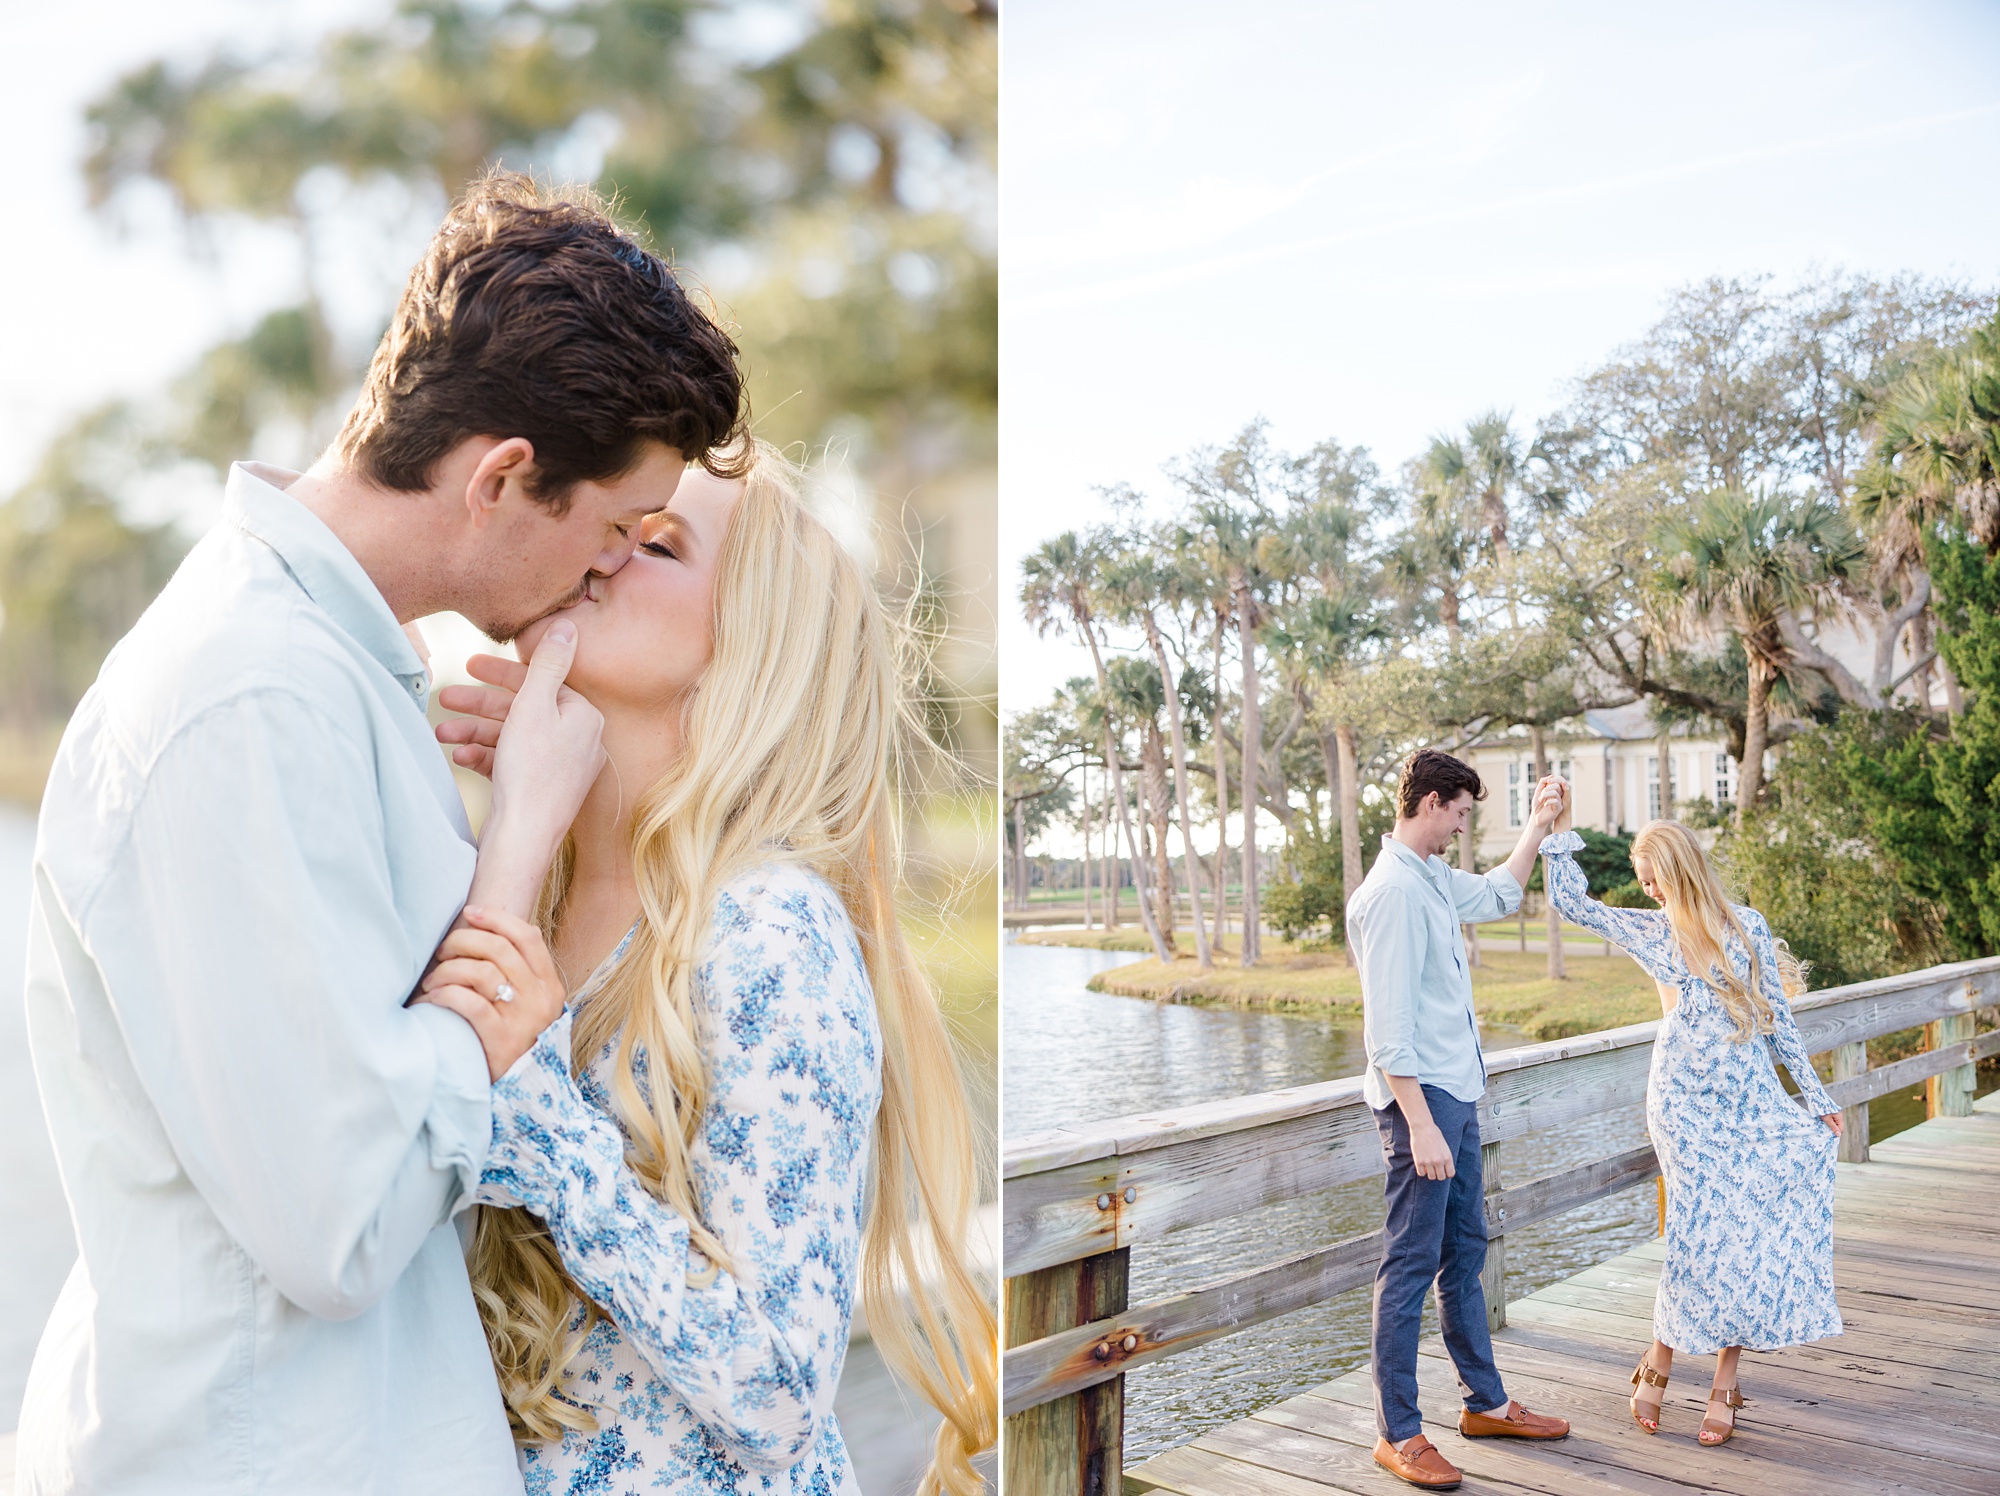 man kisses woman during engagement session on wooden dock on Kiawah Island